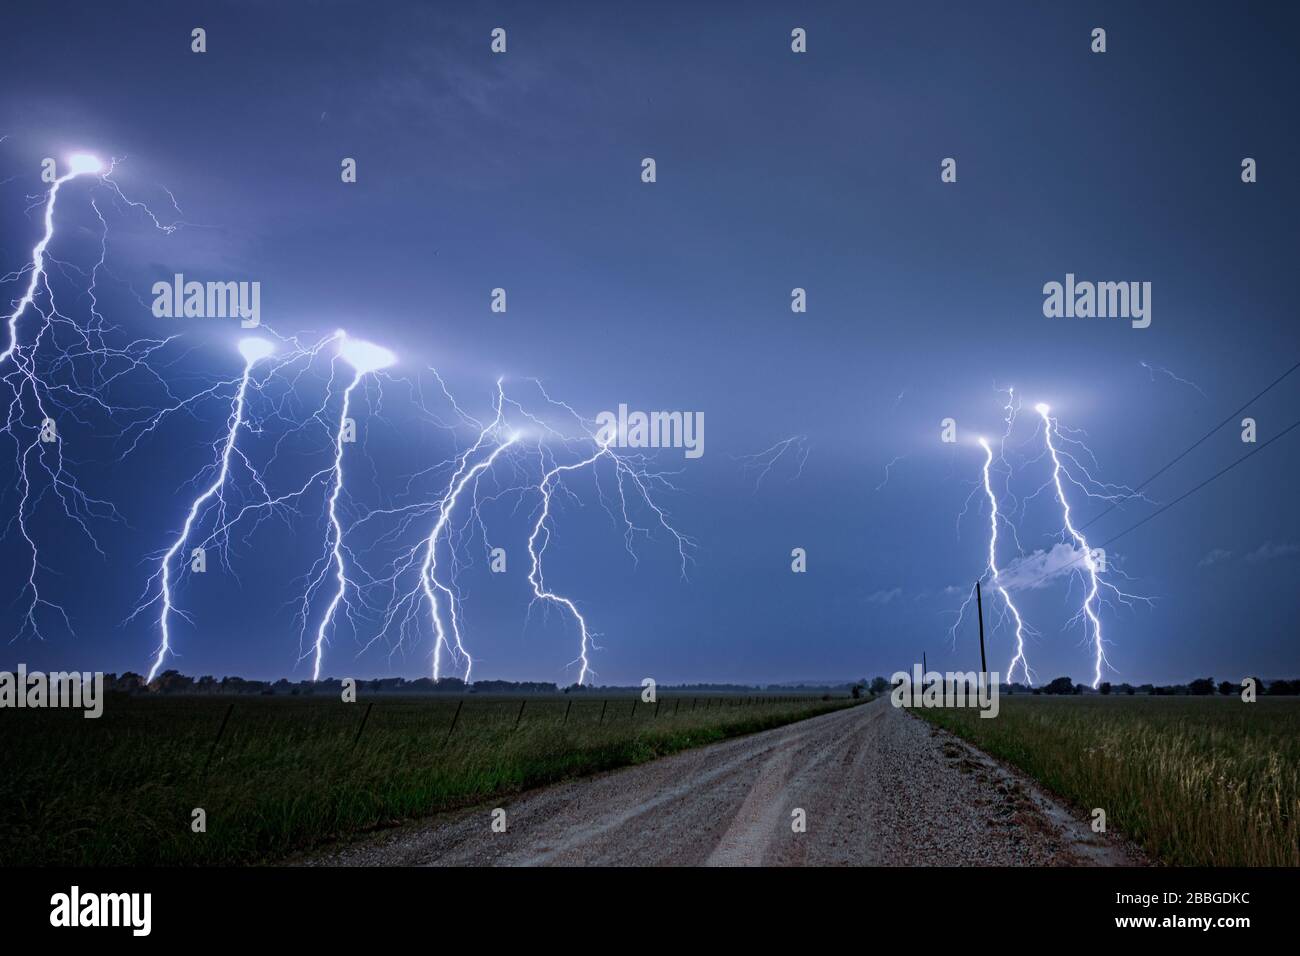 Storm with cloud to ground lightning flashing over old rural road in Kansas United States 4 image composition Stock Photo